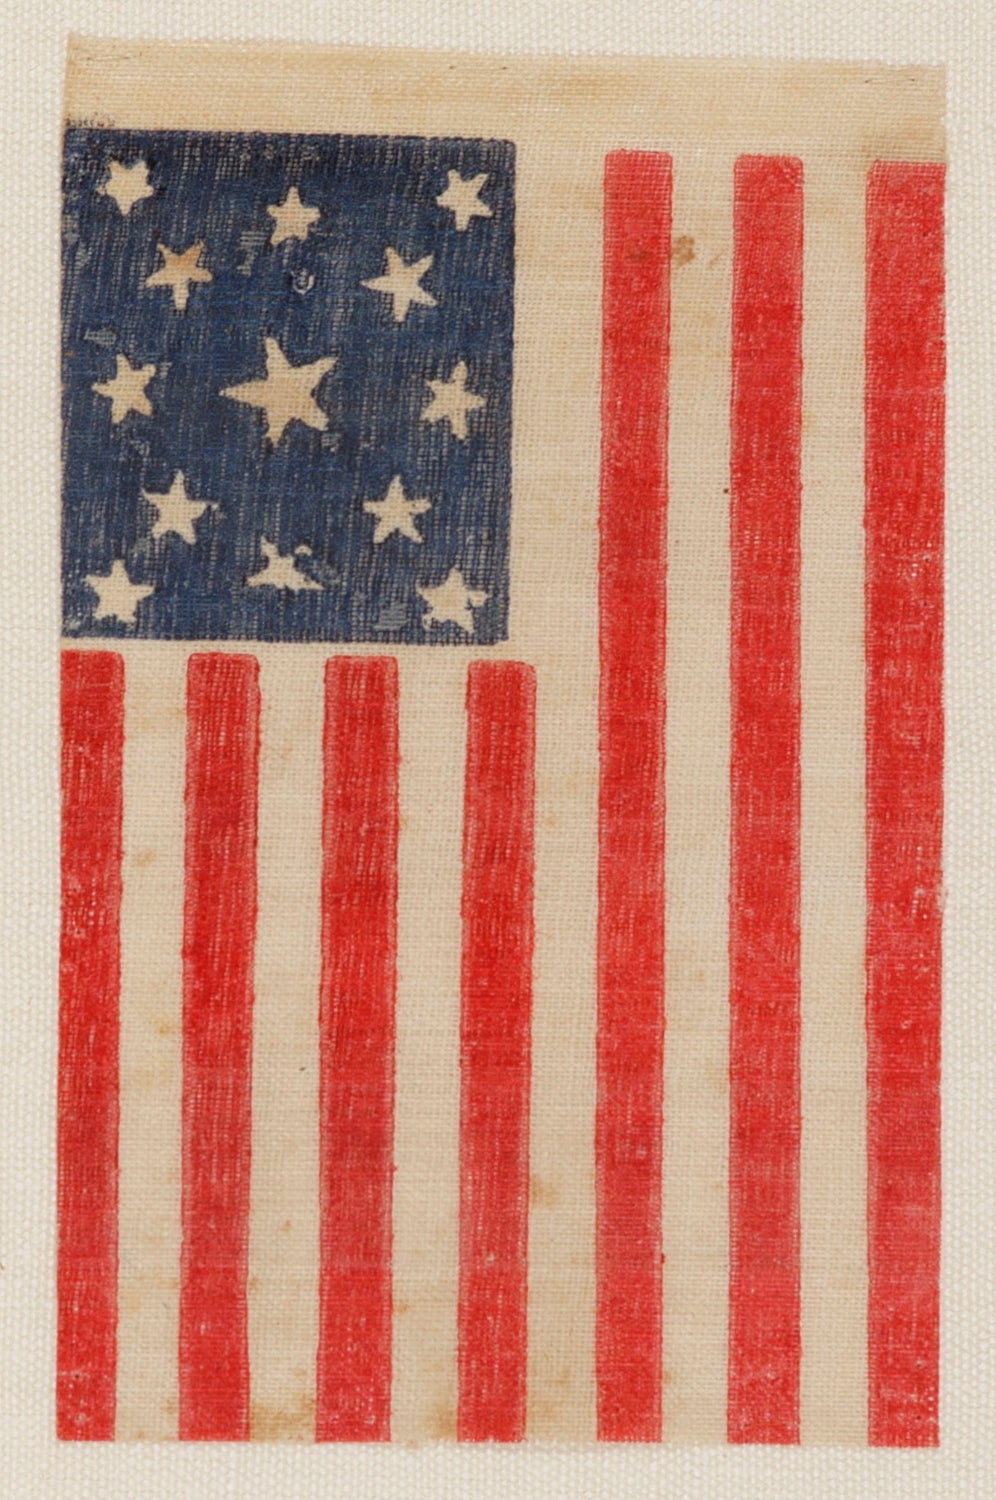 13 stars in a medallion configuration on a large-scale parade flag made for the 1876 centennial:

 13 star American national parade flag, printed on coarse, glazed cotton, made for the 1876 celebration of our nation’s 100-year anniversary of